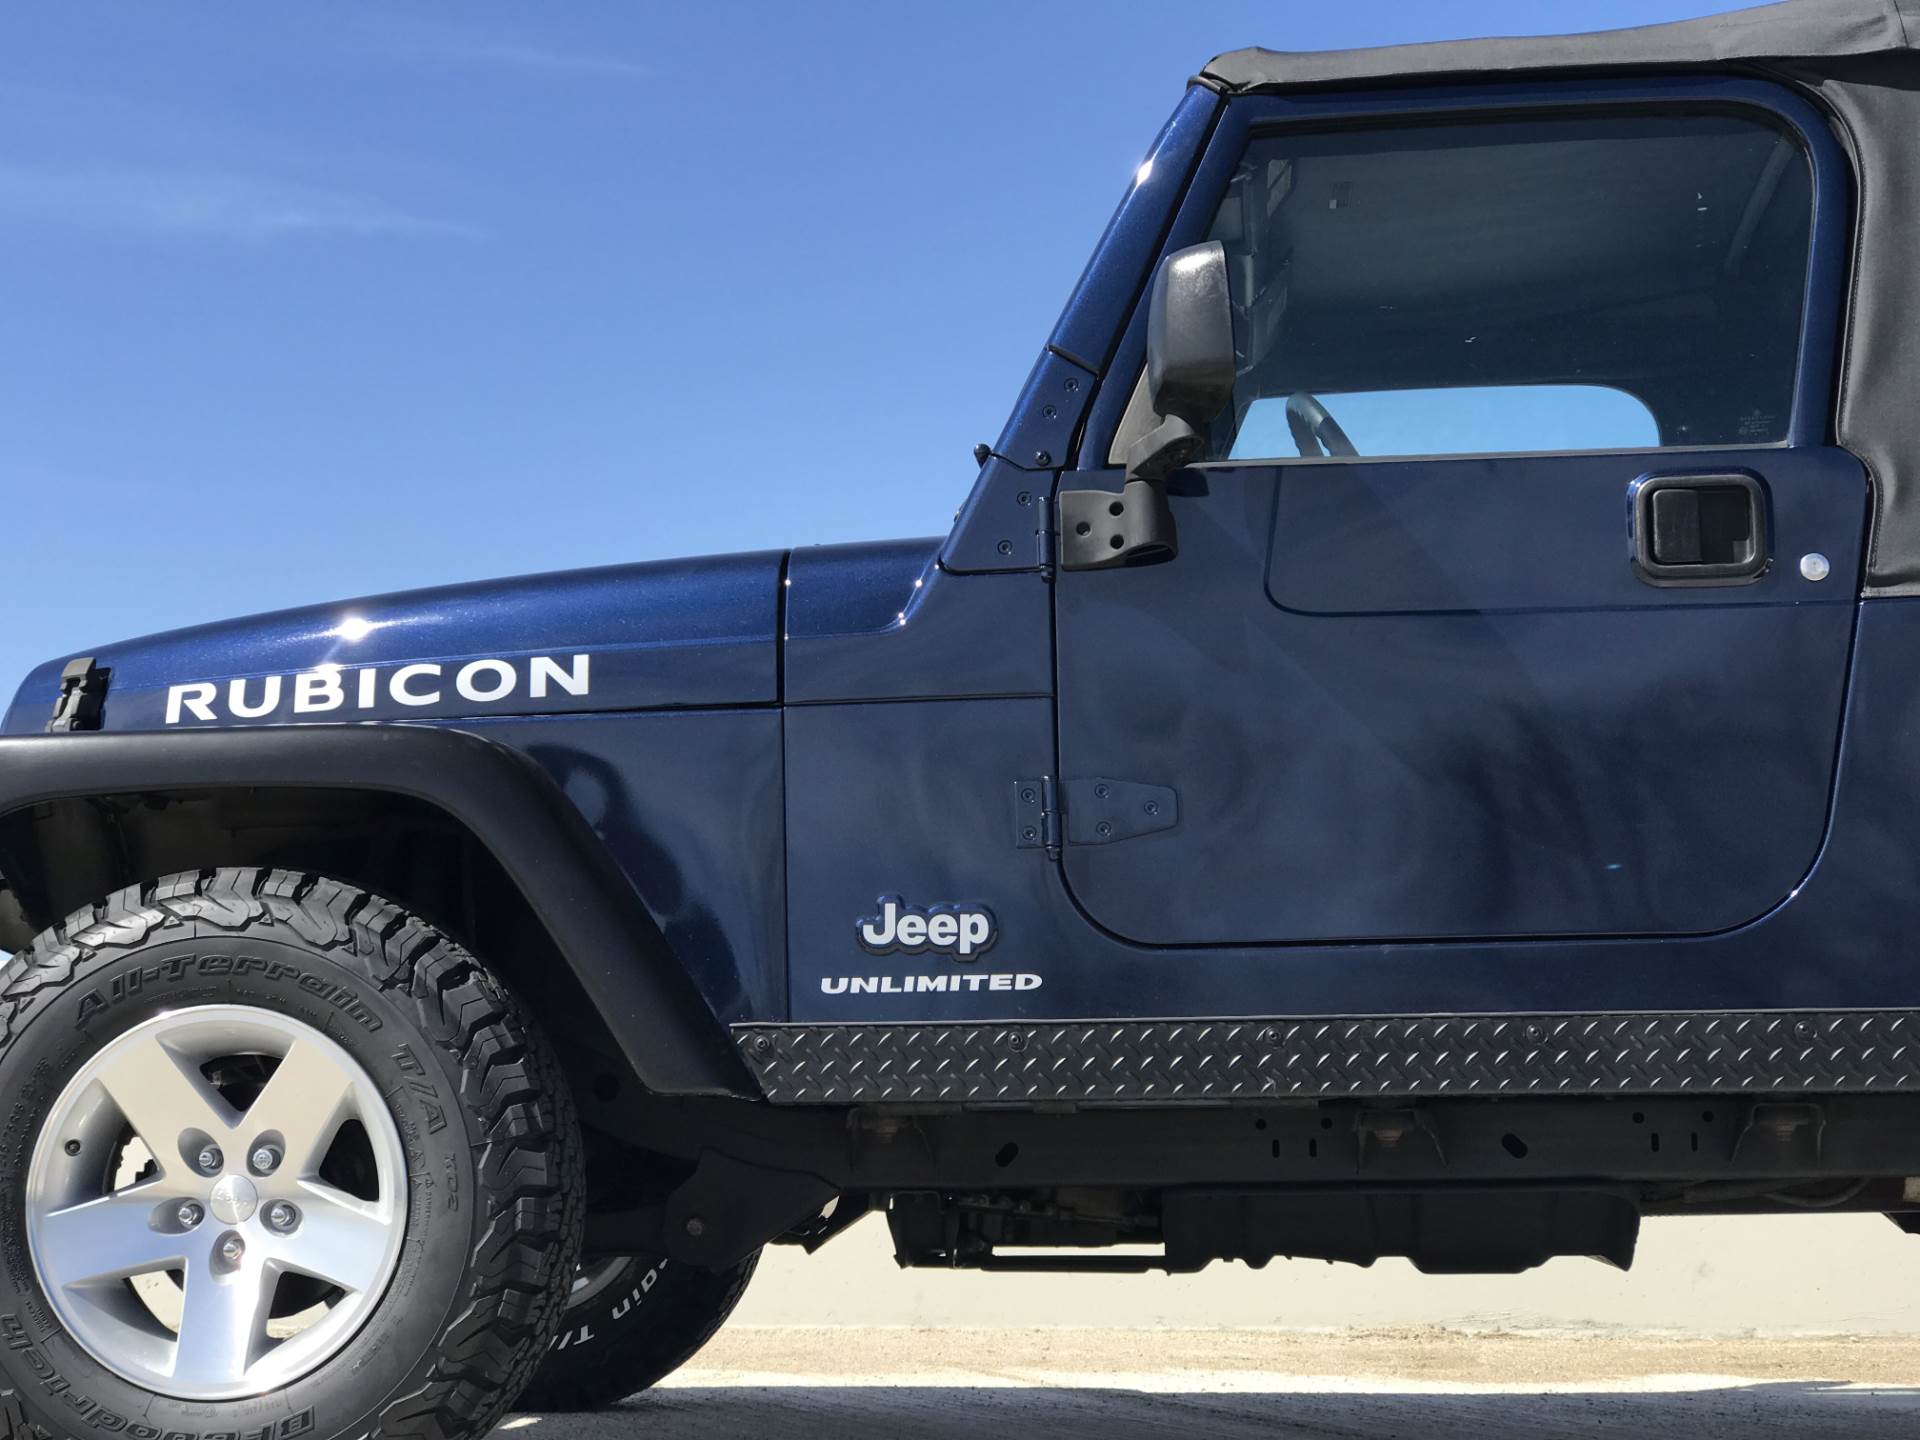 2006 Jeep Wrangler Unlimited Rubicon 2dr SUV 4WD in Big Bend, Wisconsin - Photo 124